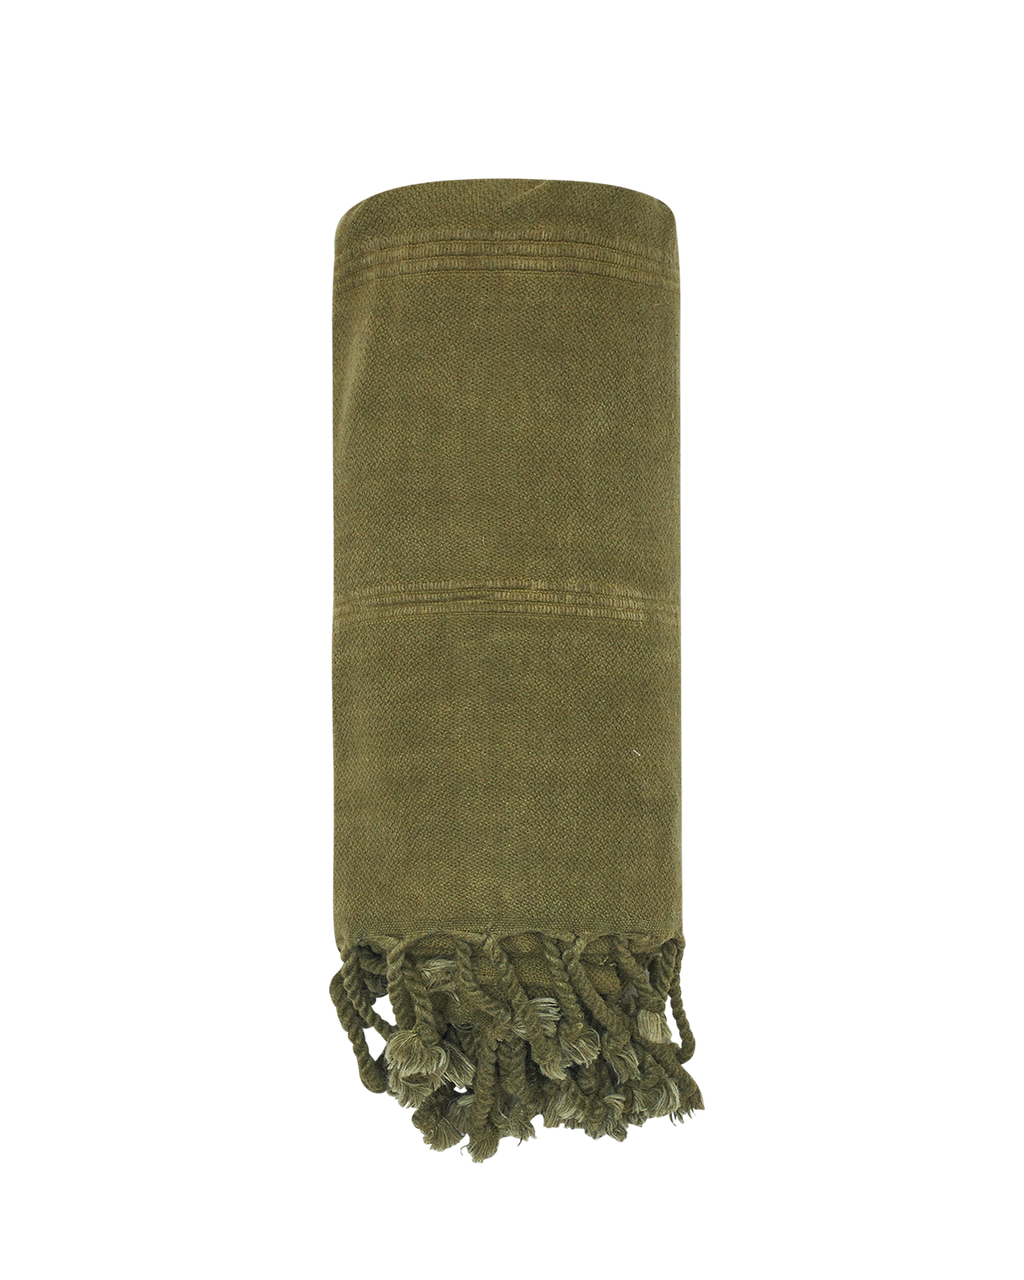 https://www.getsunkissed.com/cdn/shop/files/CAPRI-ROLLED-OLIVE-GREEN-SUNKISSED-BEACH-TOWEL.png?v=1695261602&width=1024